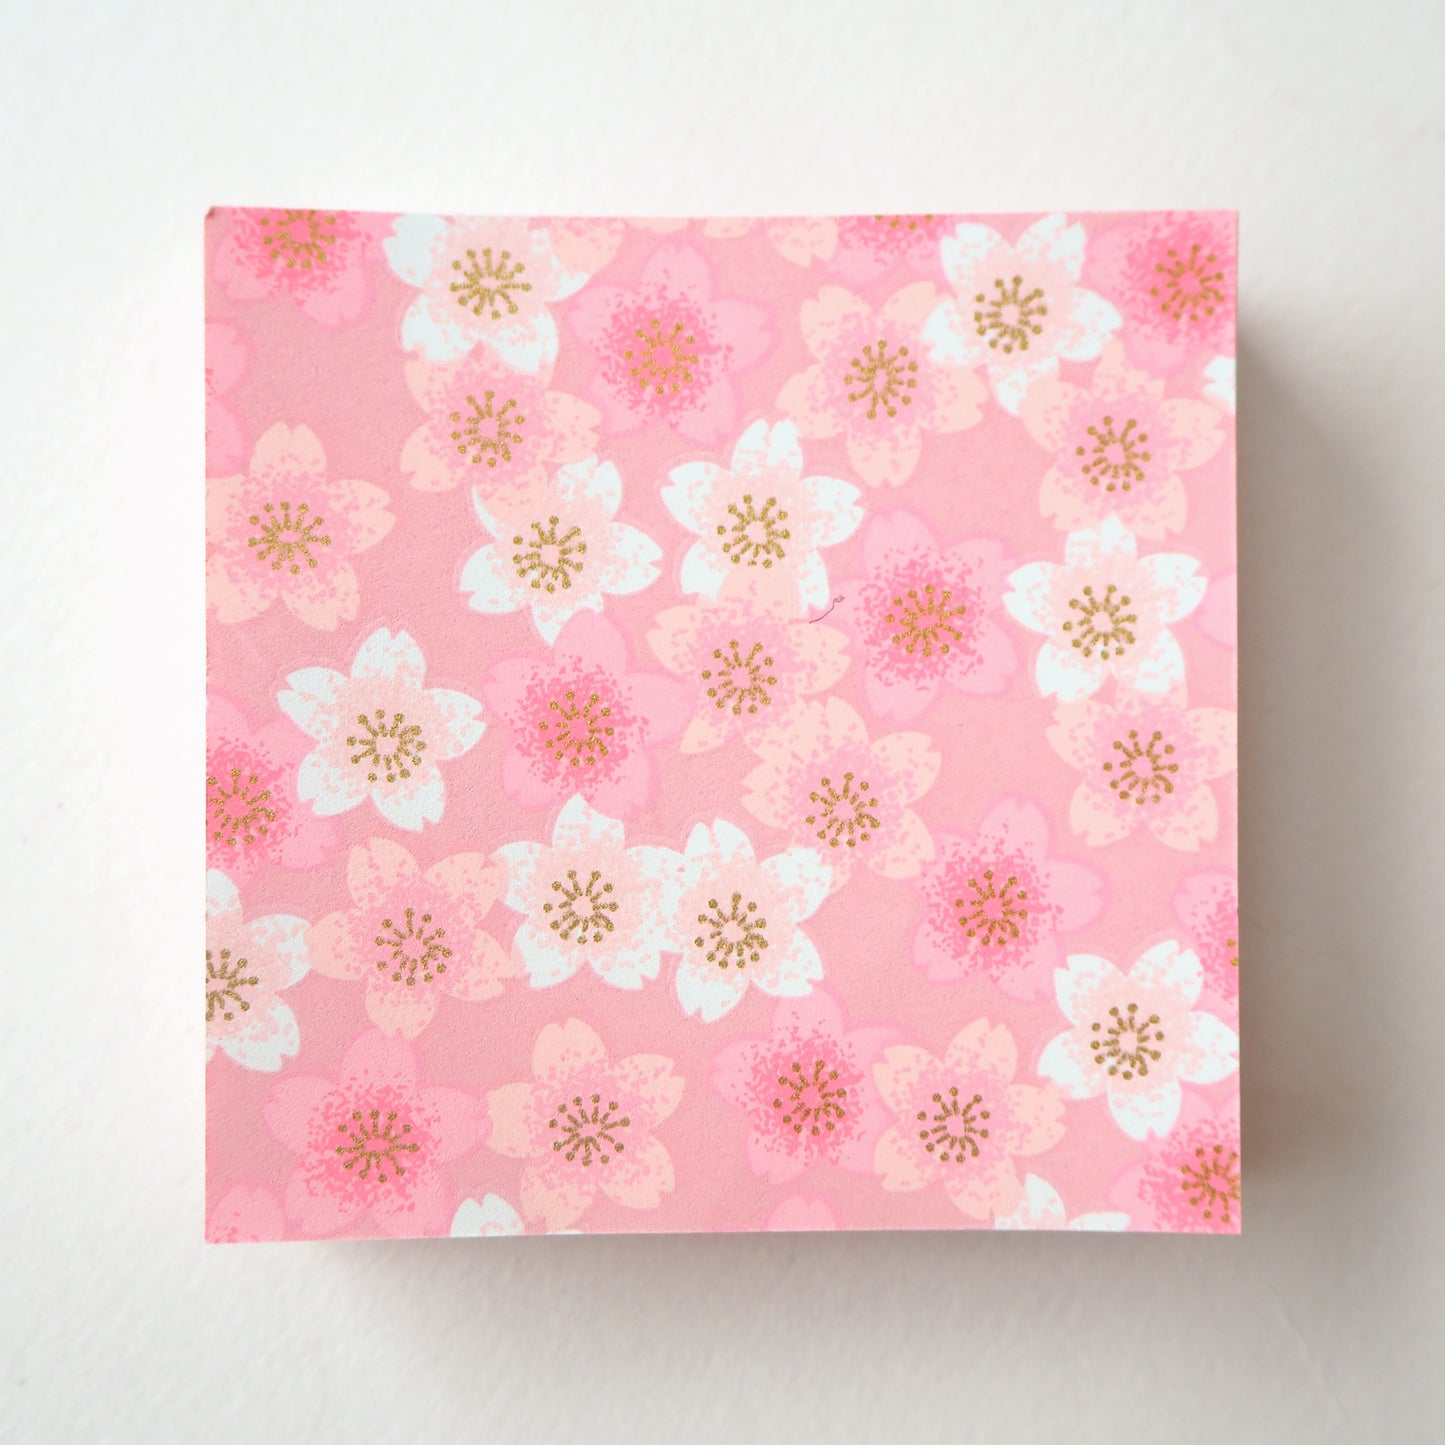 Pack of 100 Sheets 7x7cm Yuzen Washi Origami Paper HZ-504 - Pink Shades Cherry Blossom - washi paper - Lavender Home London